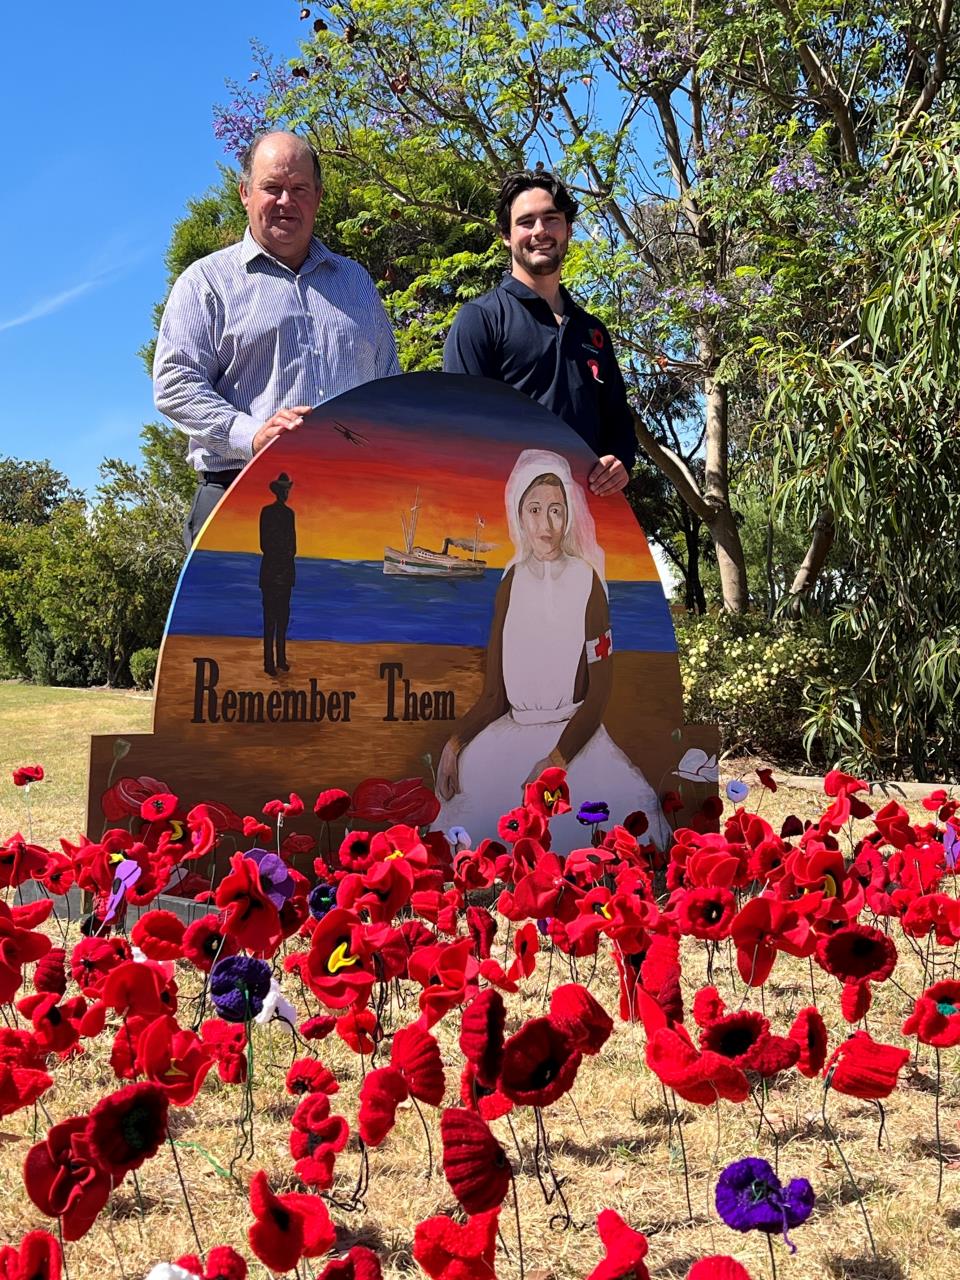 Poppy Project pays tribute to Remembrance Day